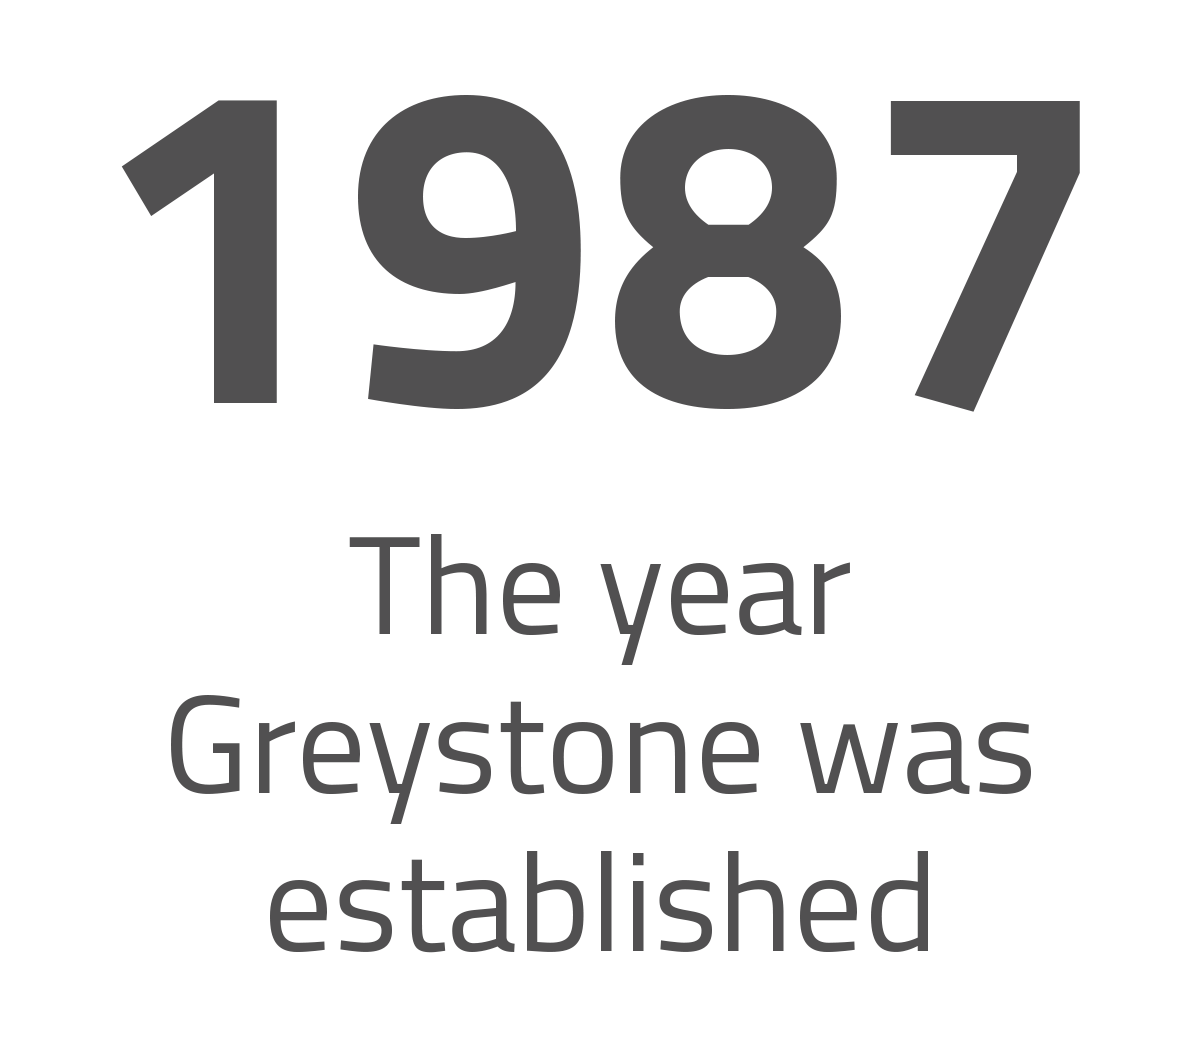 1987 is the year Greystone was established